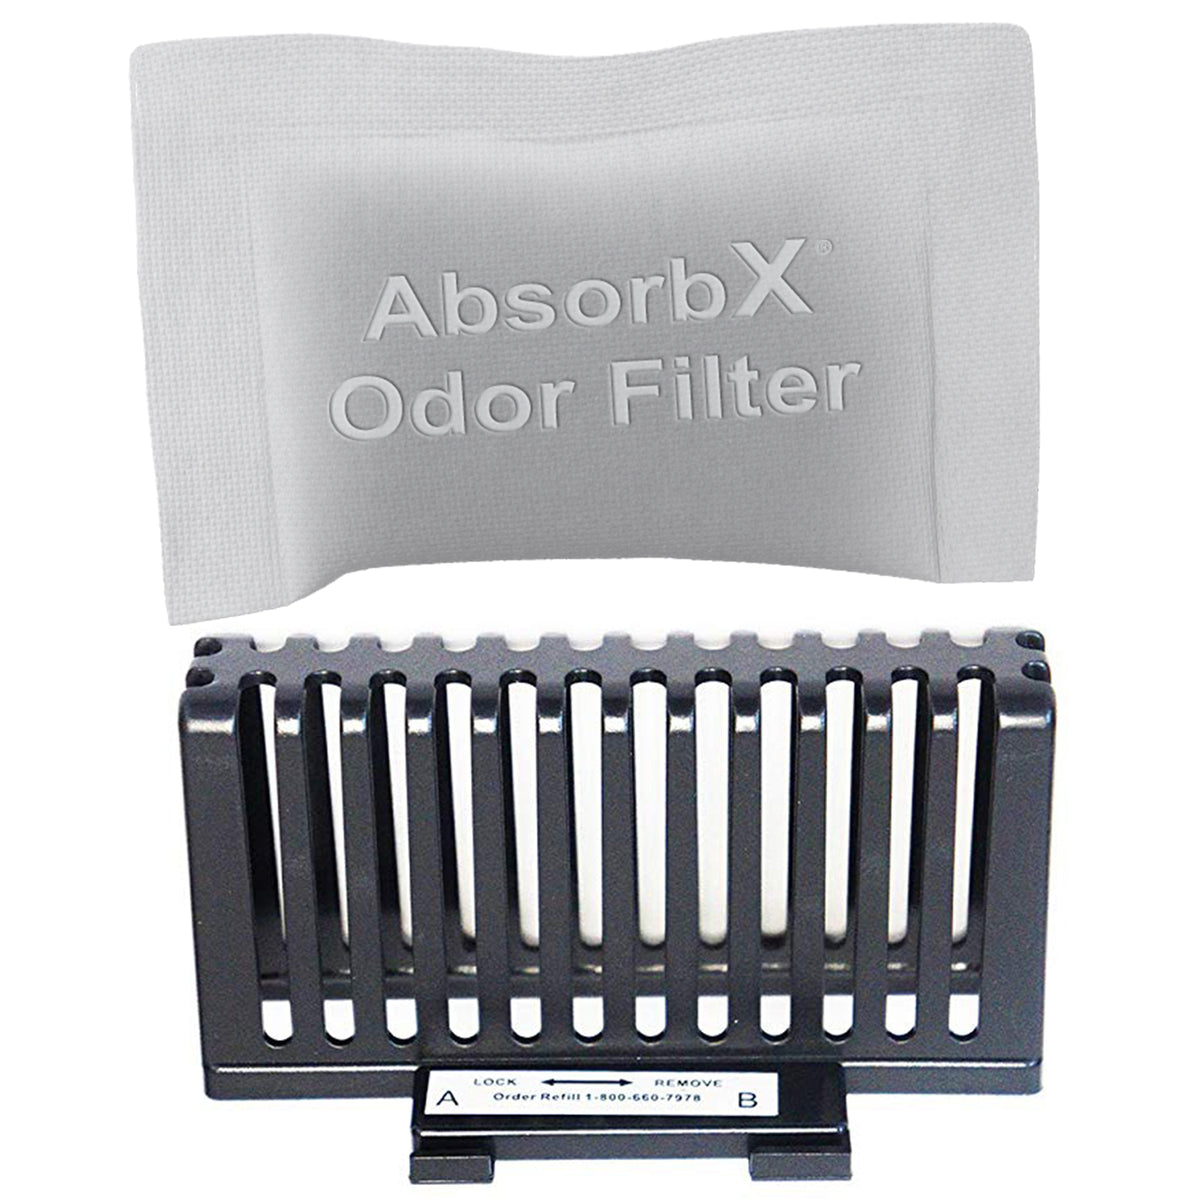 AbsorbX Odor Filter and Compartment